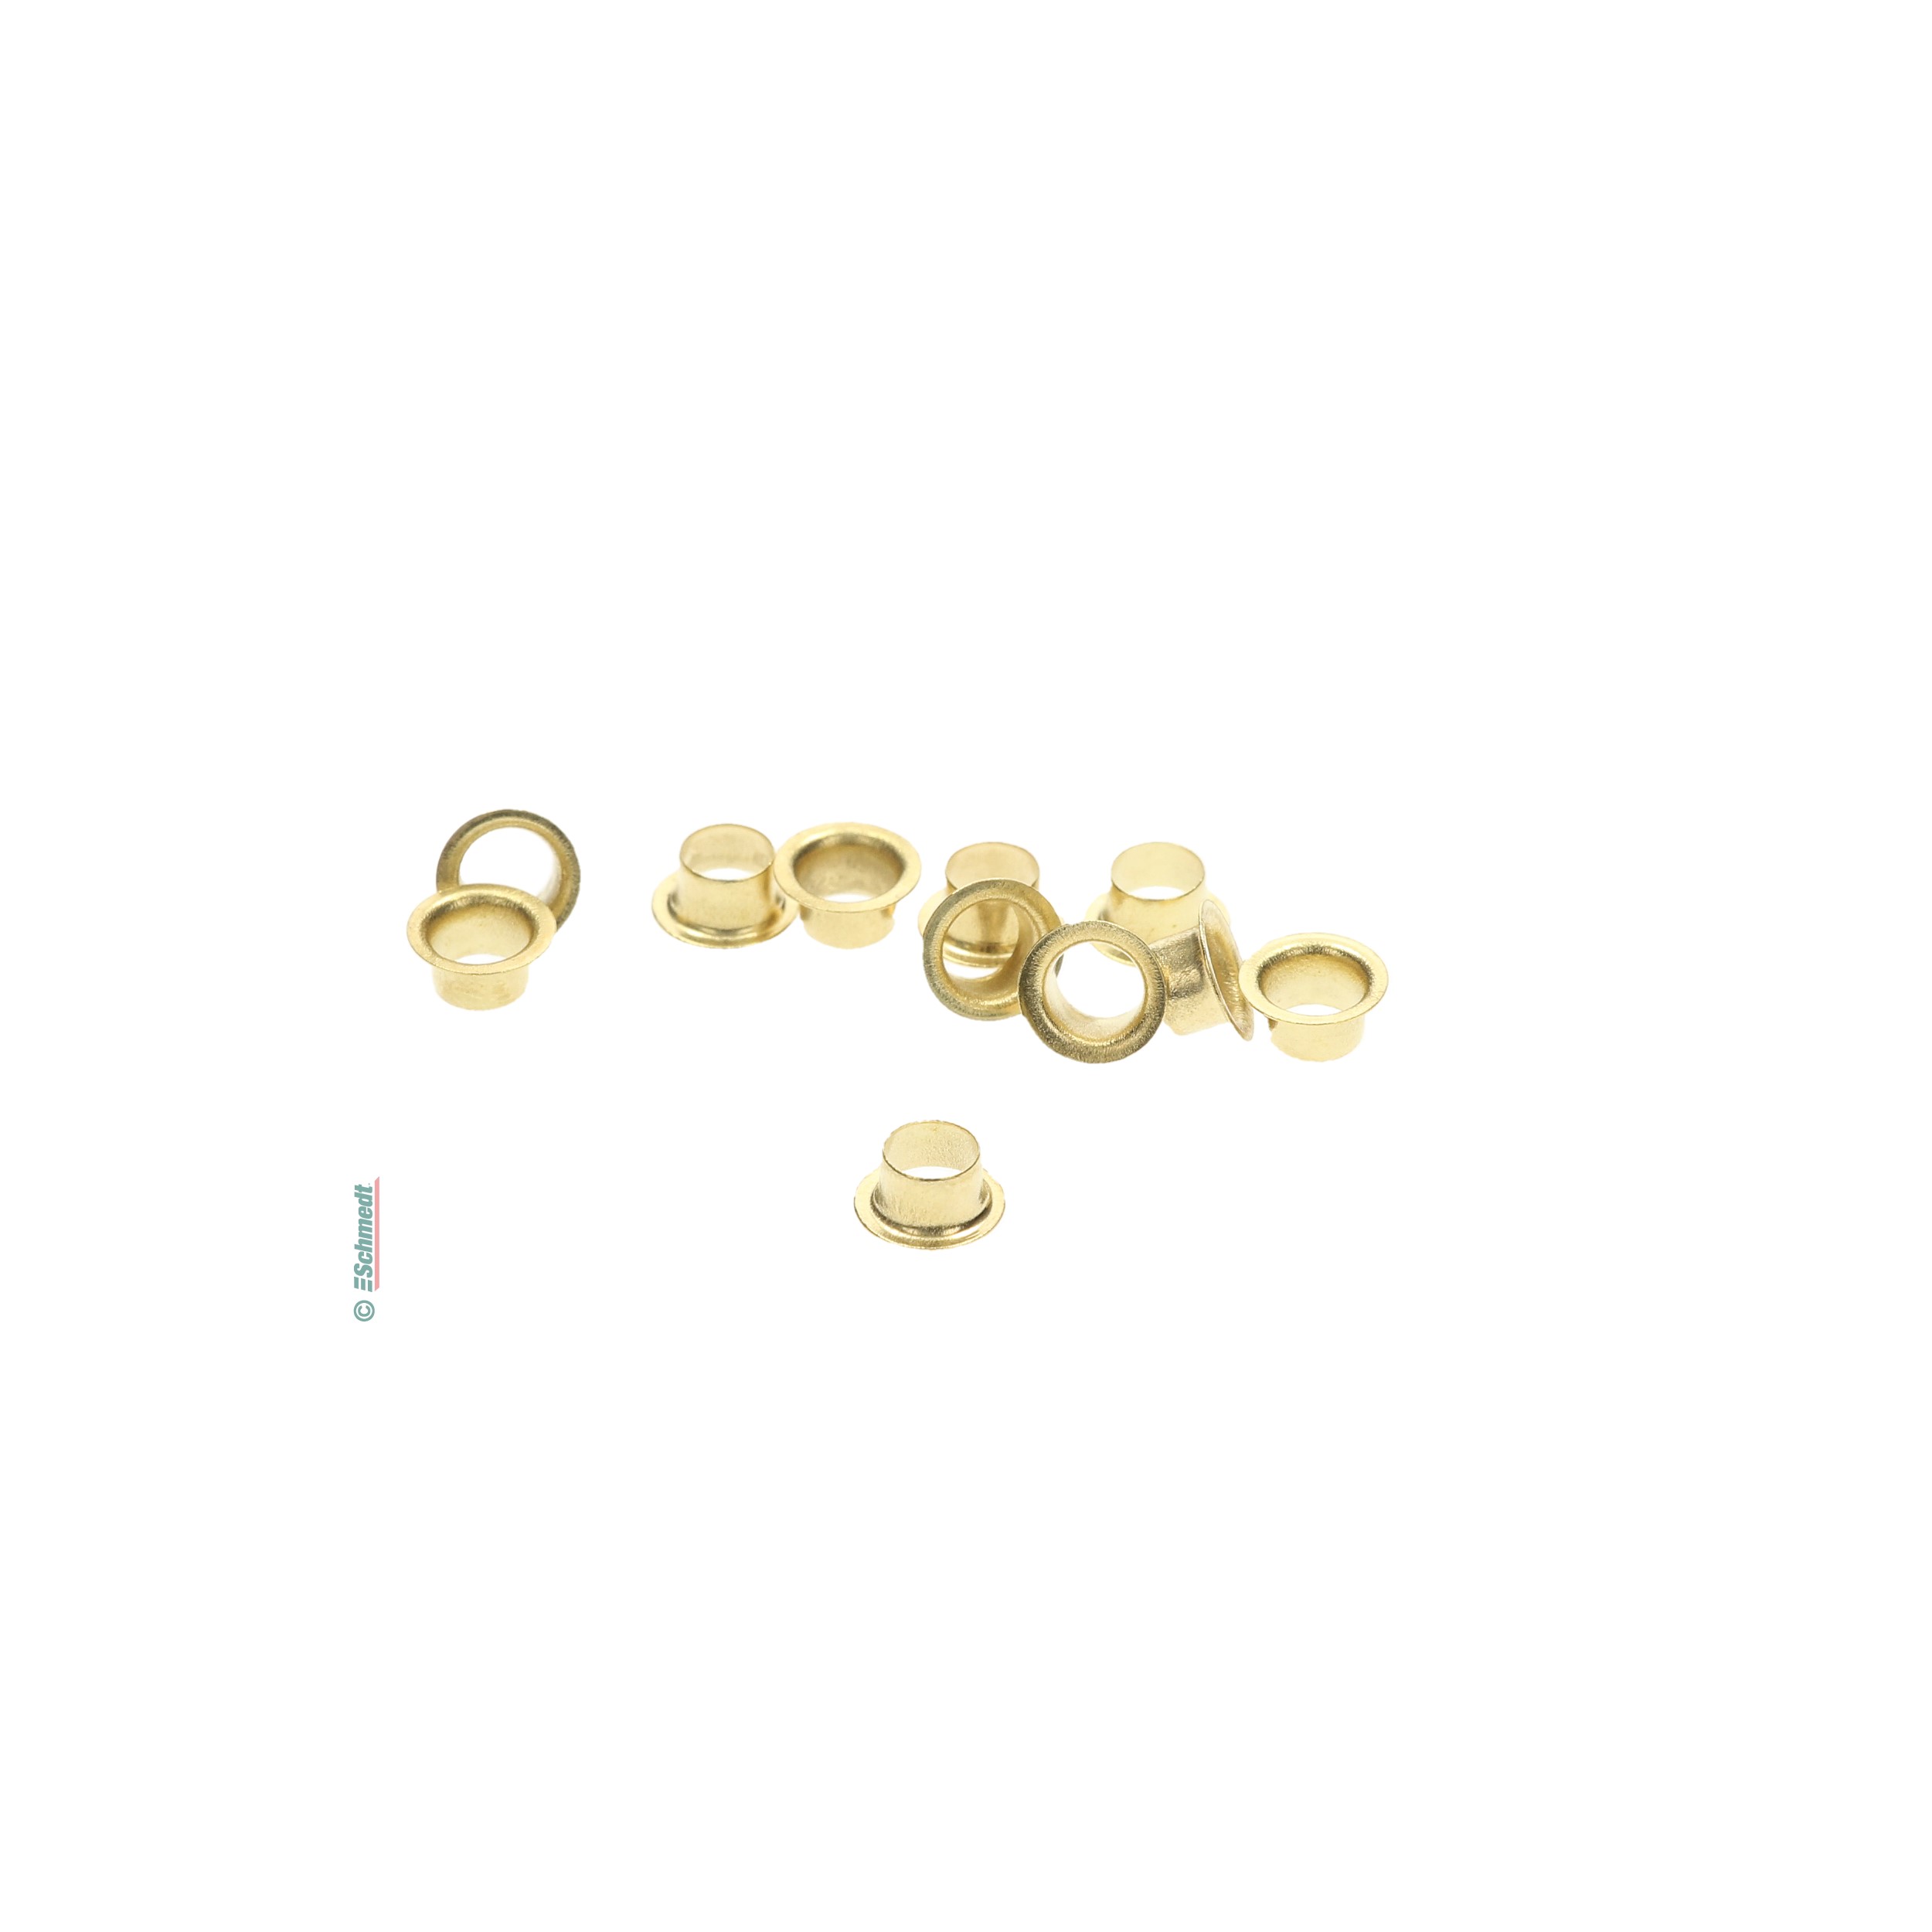 Eyelets made of metal - Type 8E | 8E long - Type 8E long - Colour gold - Sales unit 10,000 pcs - Metal eyelets prevent punched holes from te...